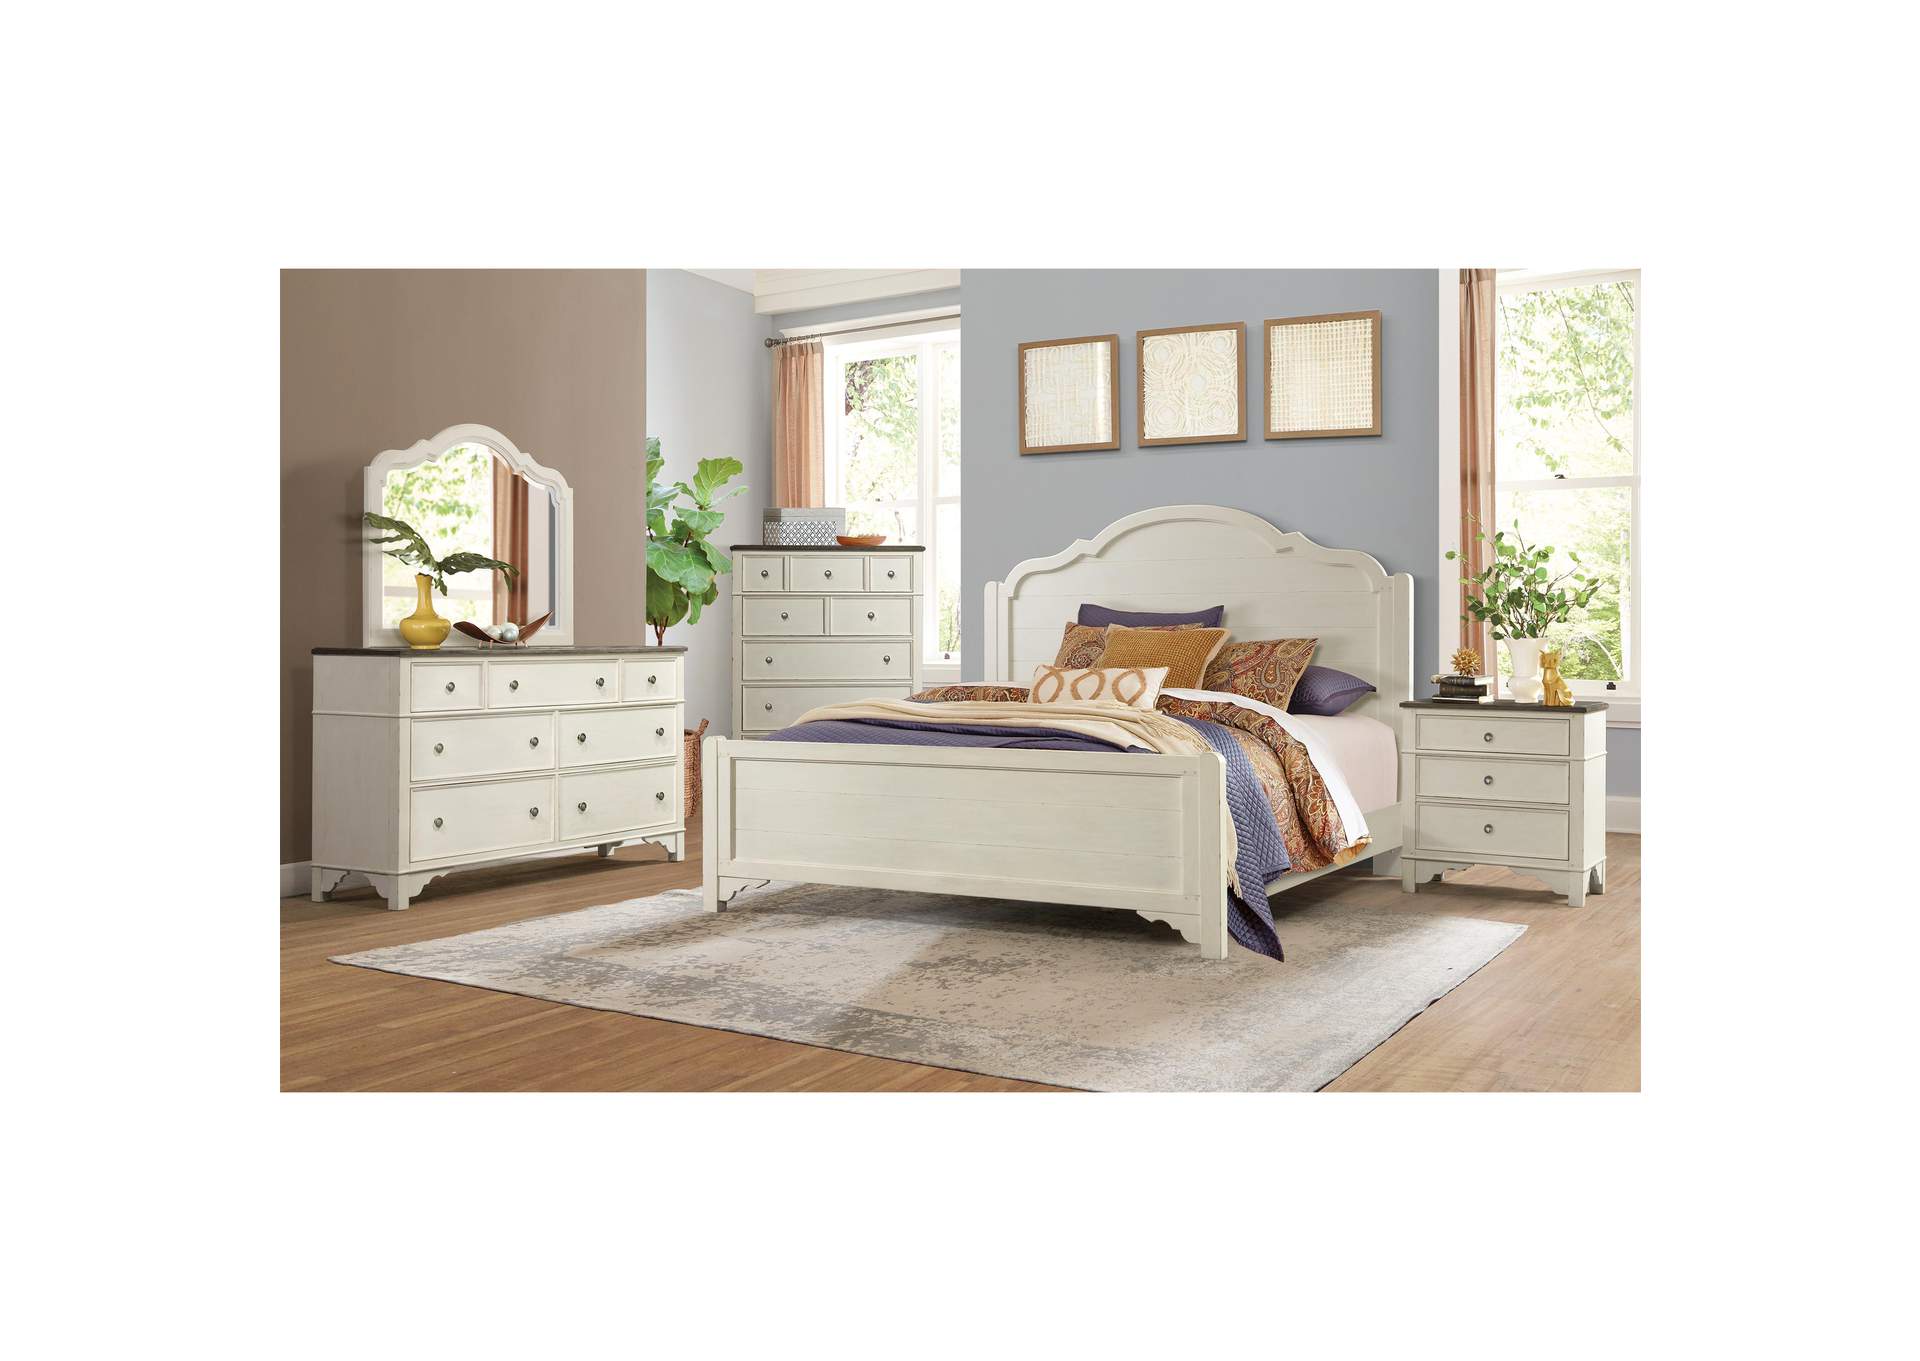 Grand Haven Feathered White Panel King Bed w/ Dresser, Mirror,Riverside